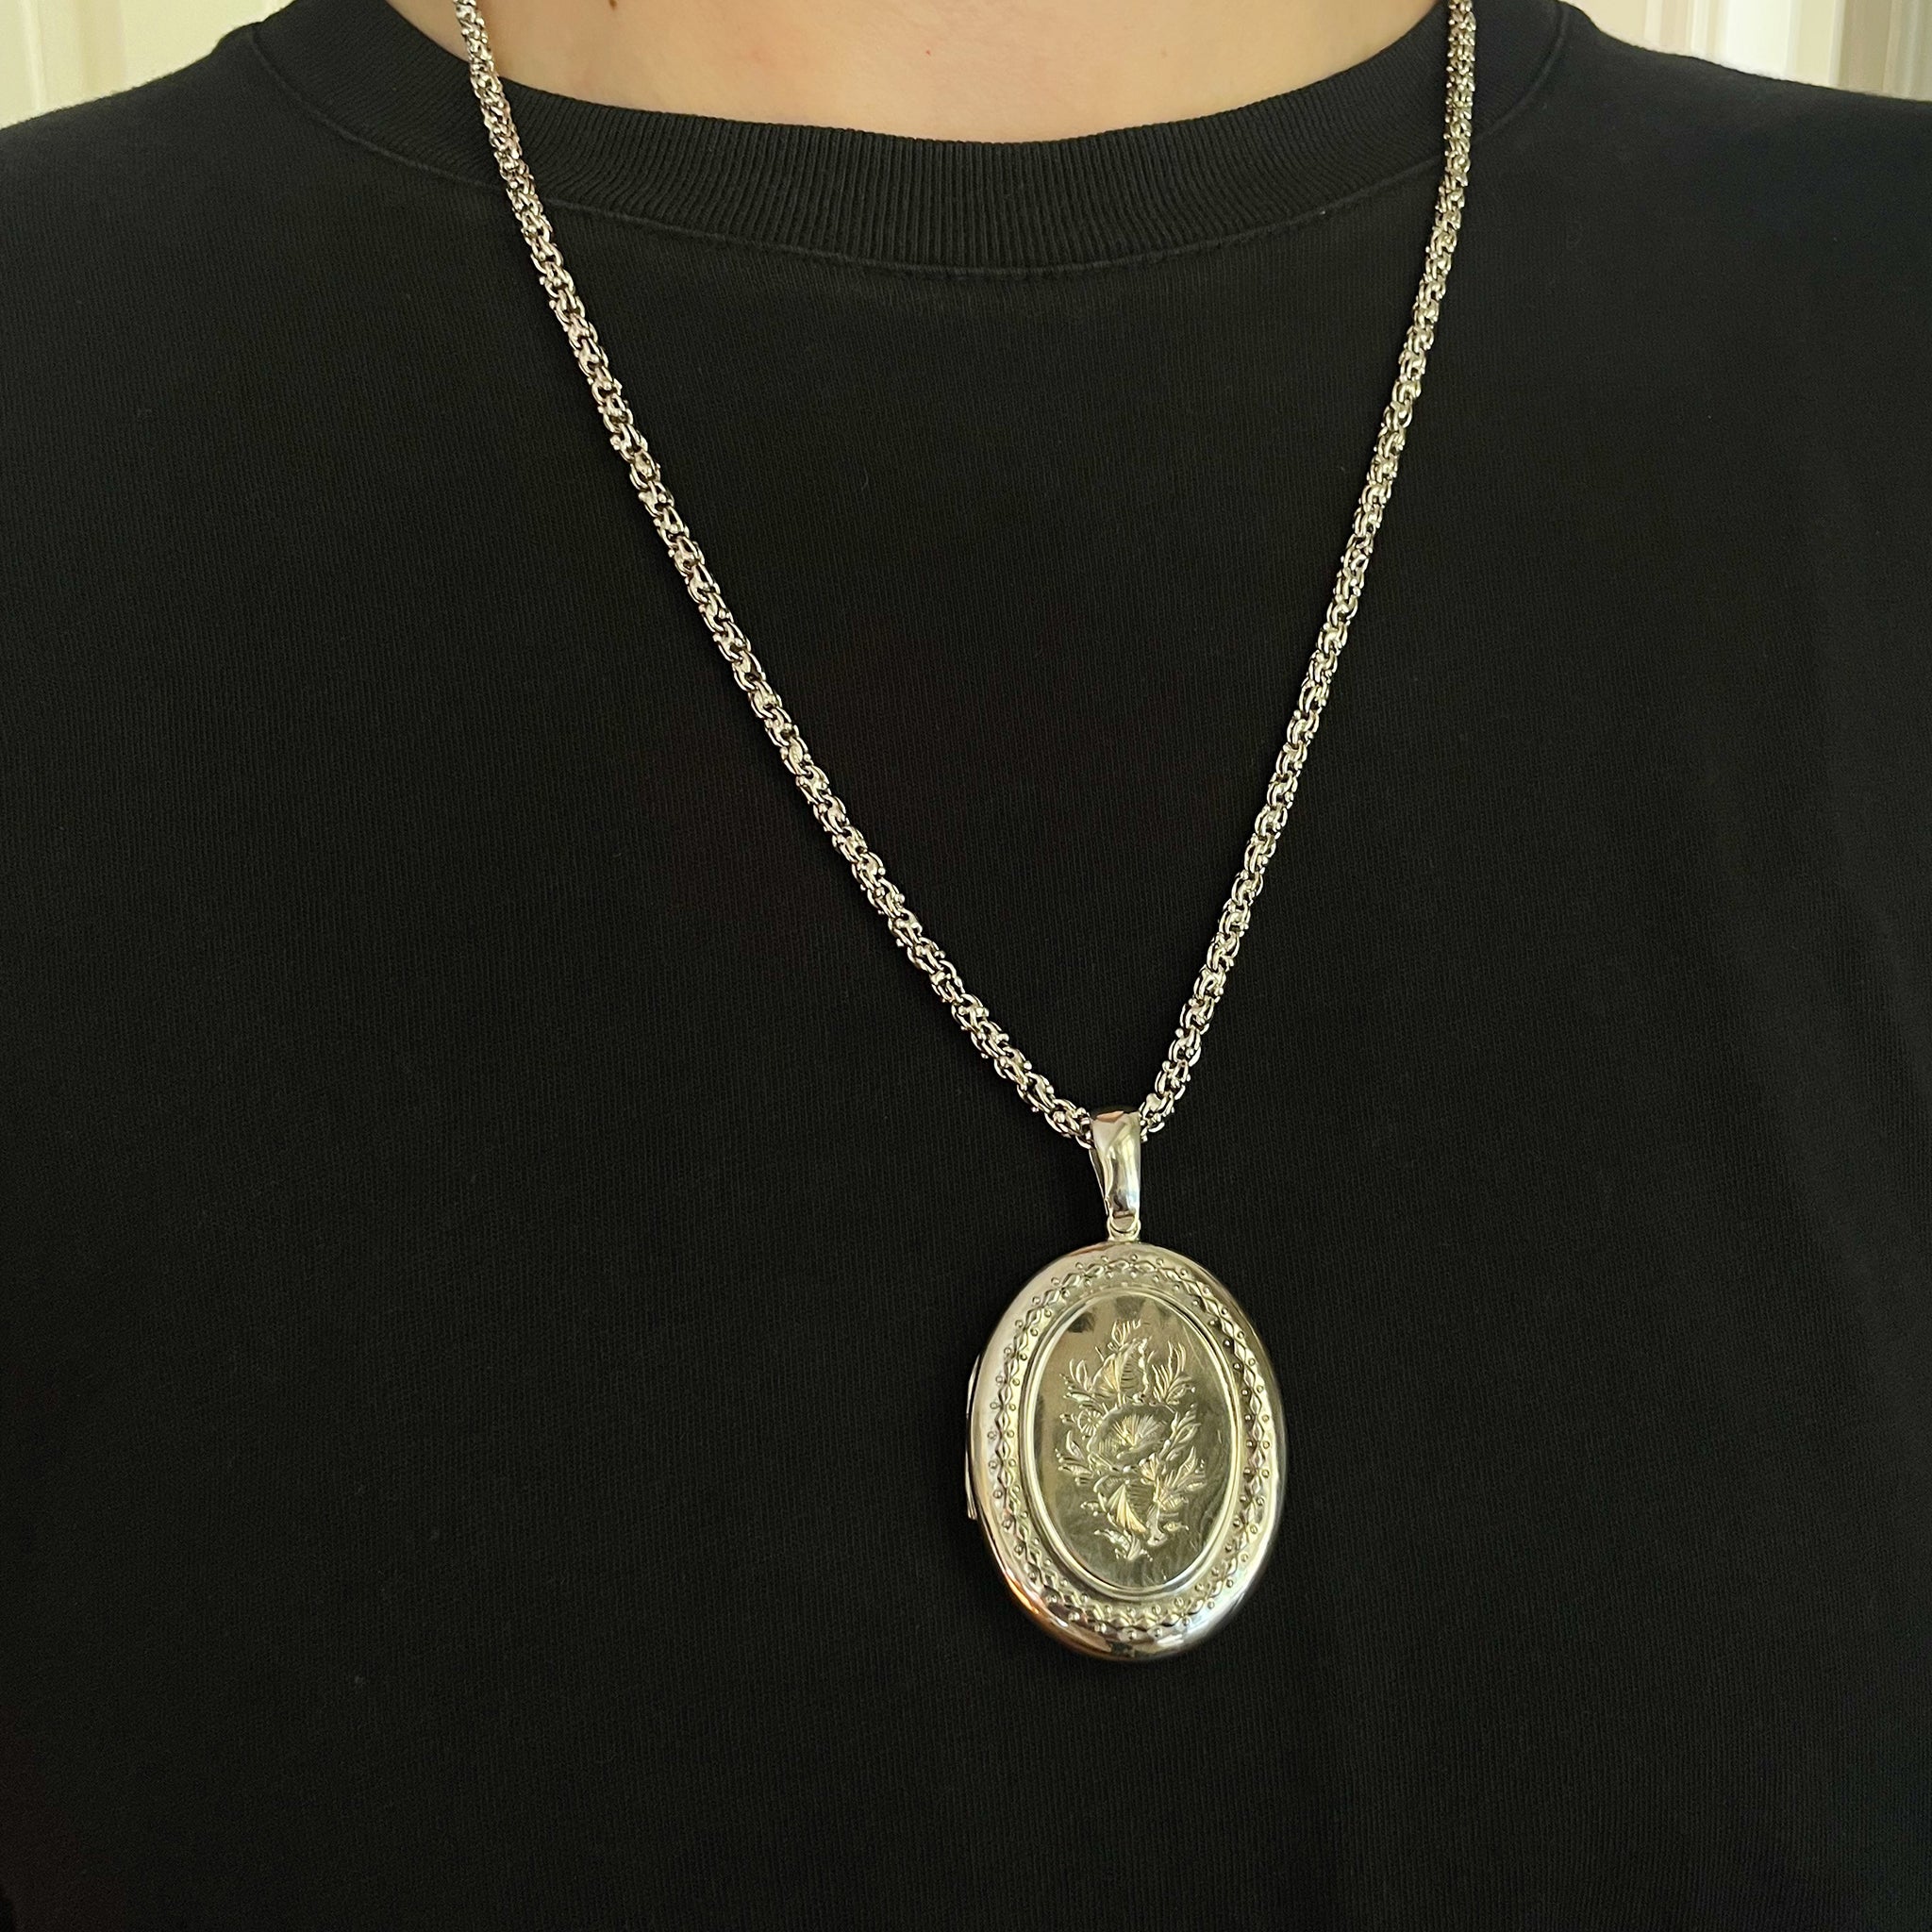 Victorian Aesthetic Silver Oval Locket Chain Necklace